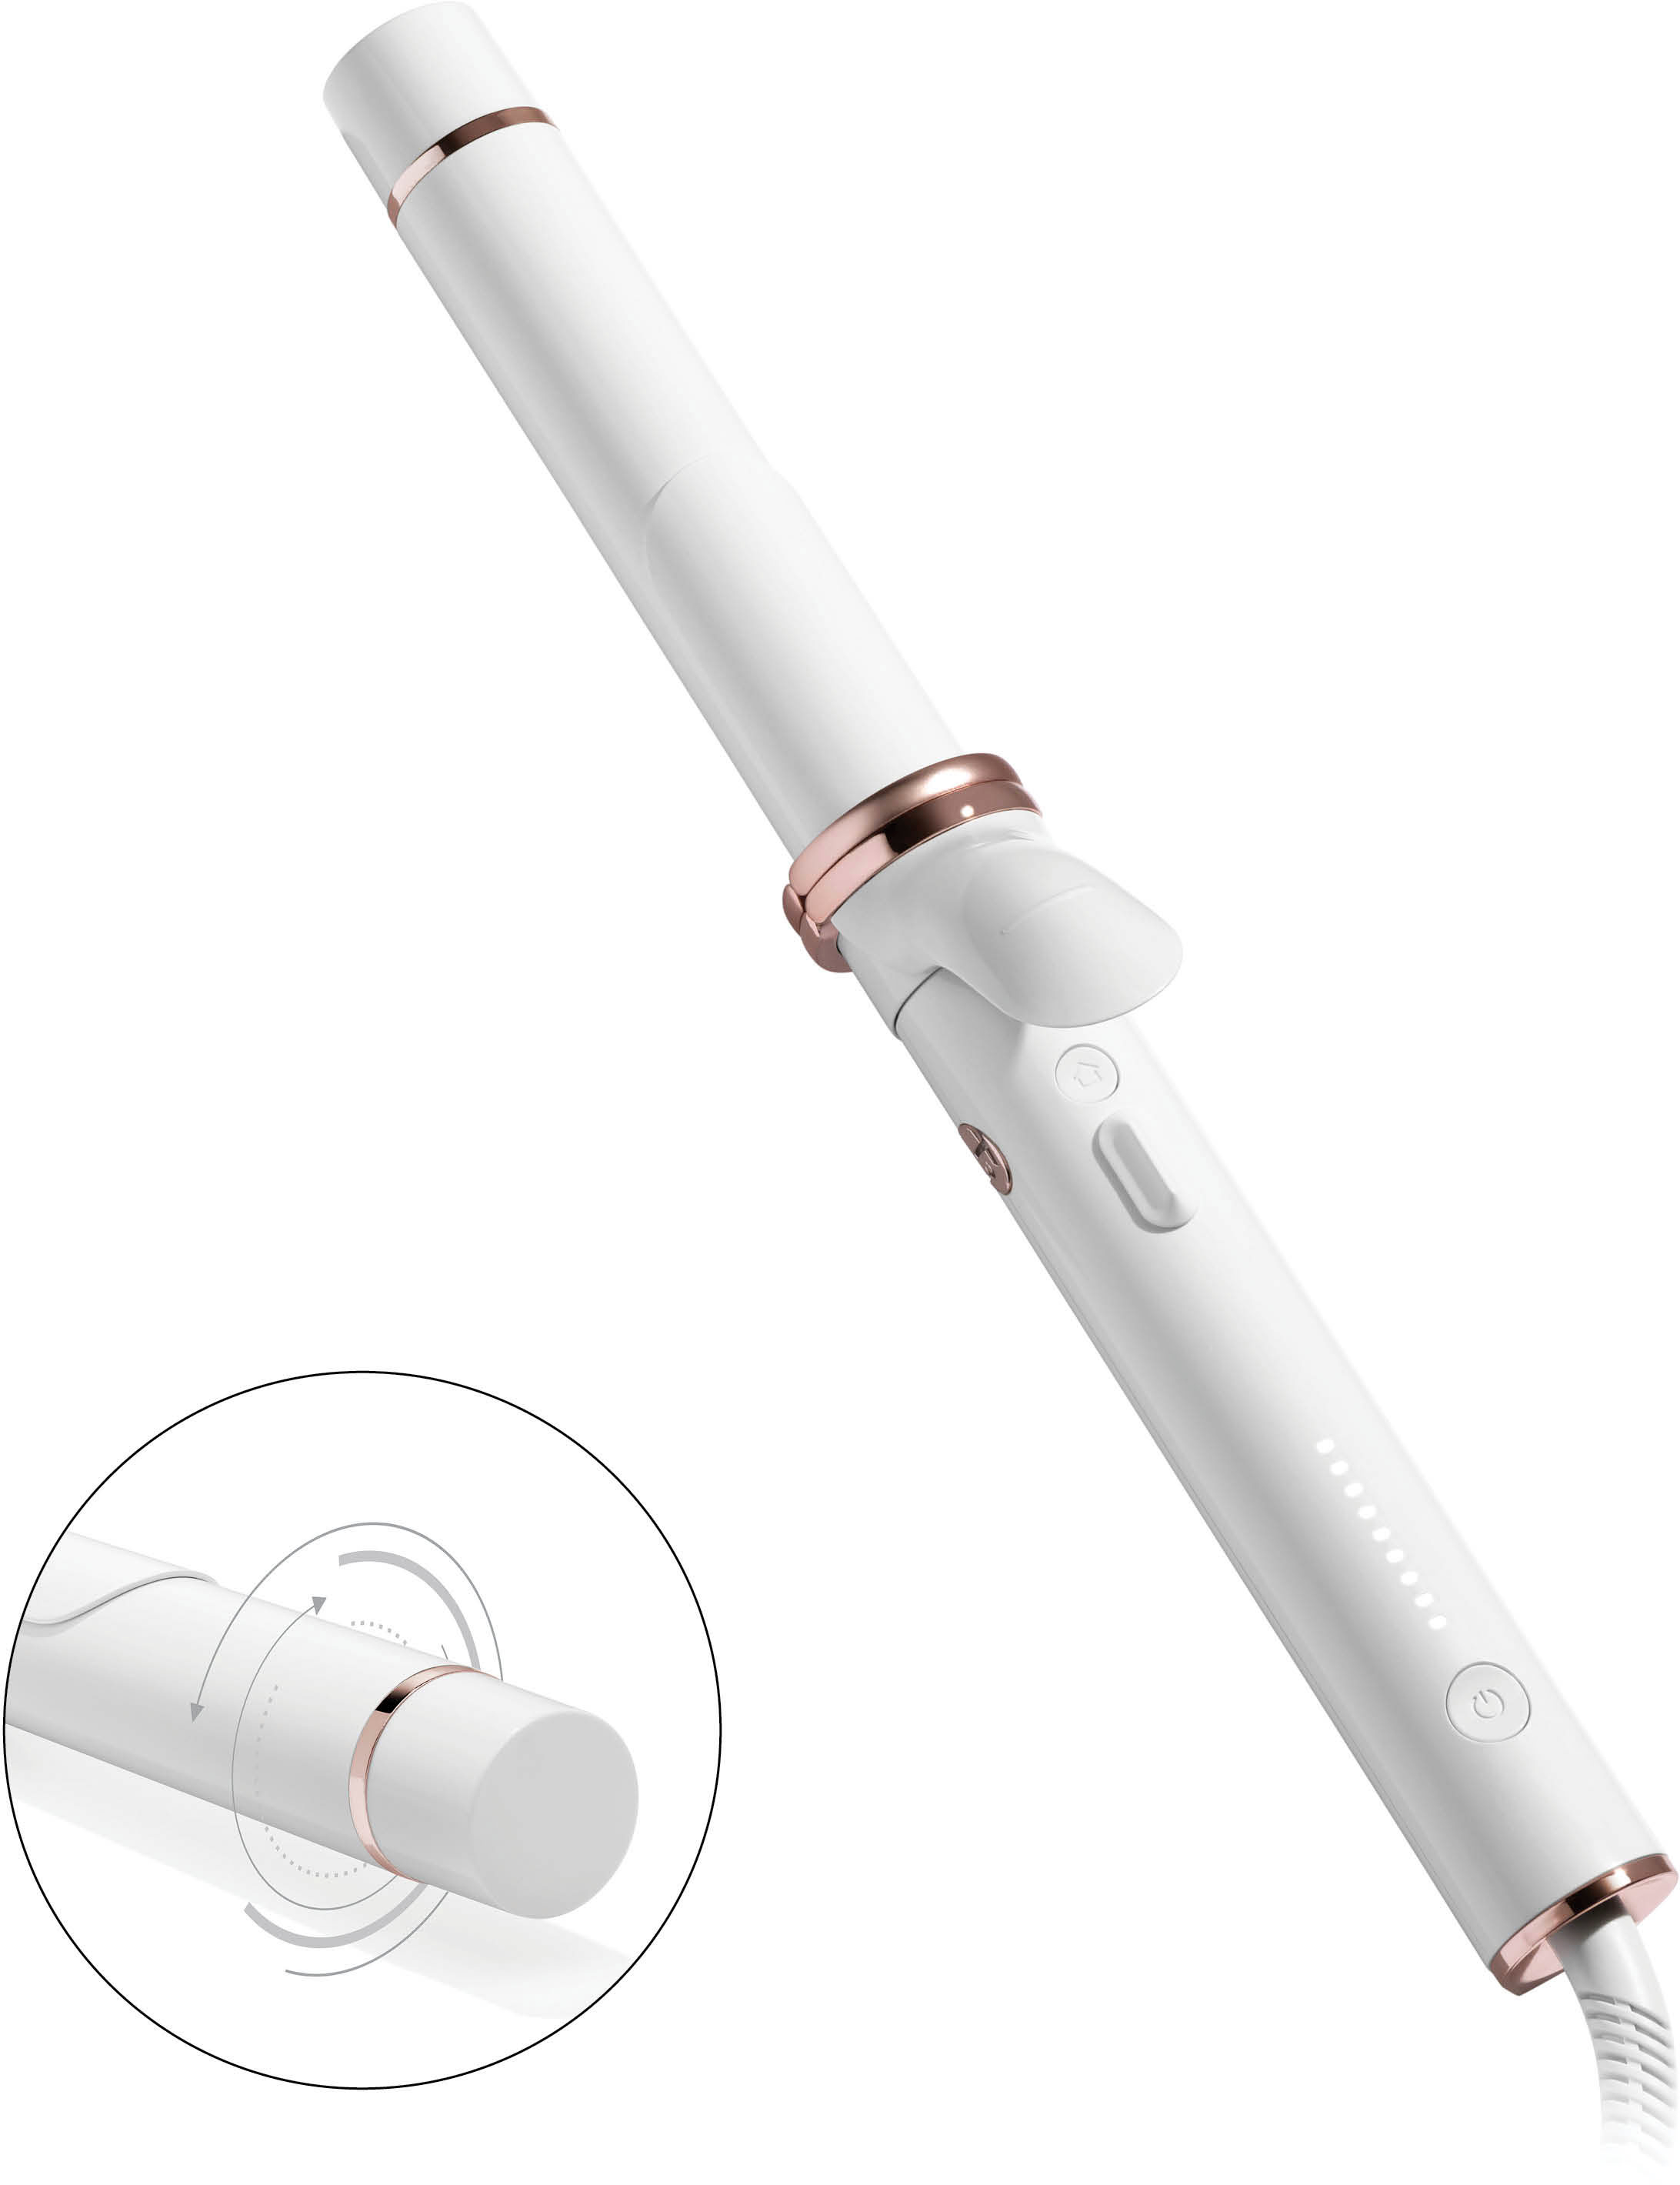 Angle View: T3 - CurlWrap 1.25" Automatic Rotating Curling Iron with Long Barrel - White